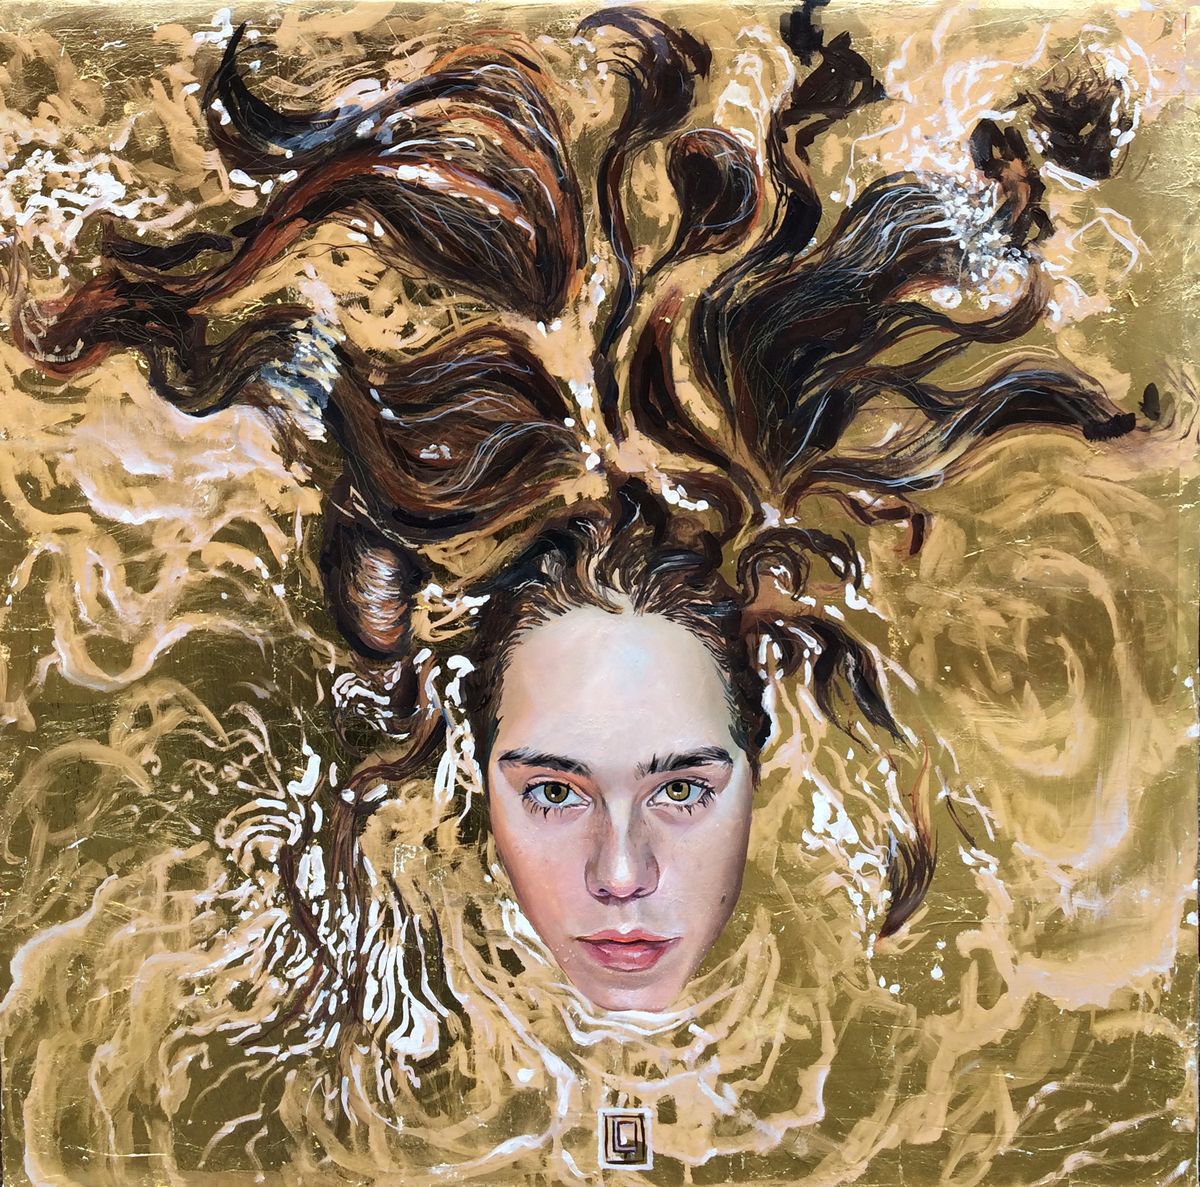 Diving Into Gold by Suzana Dzelatovic